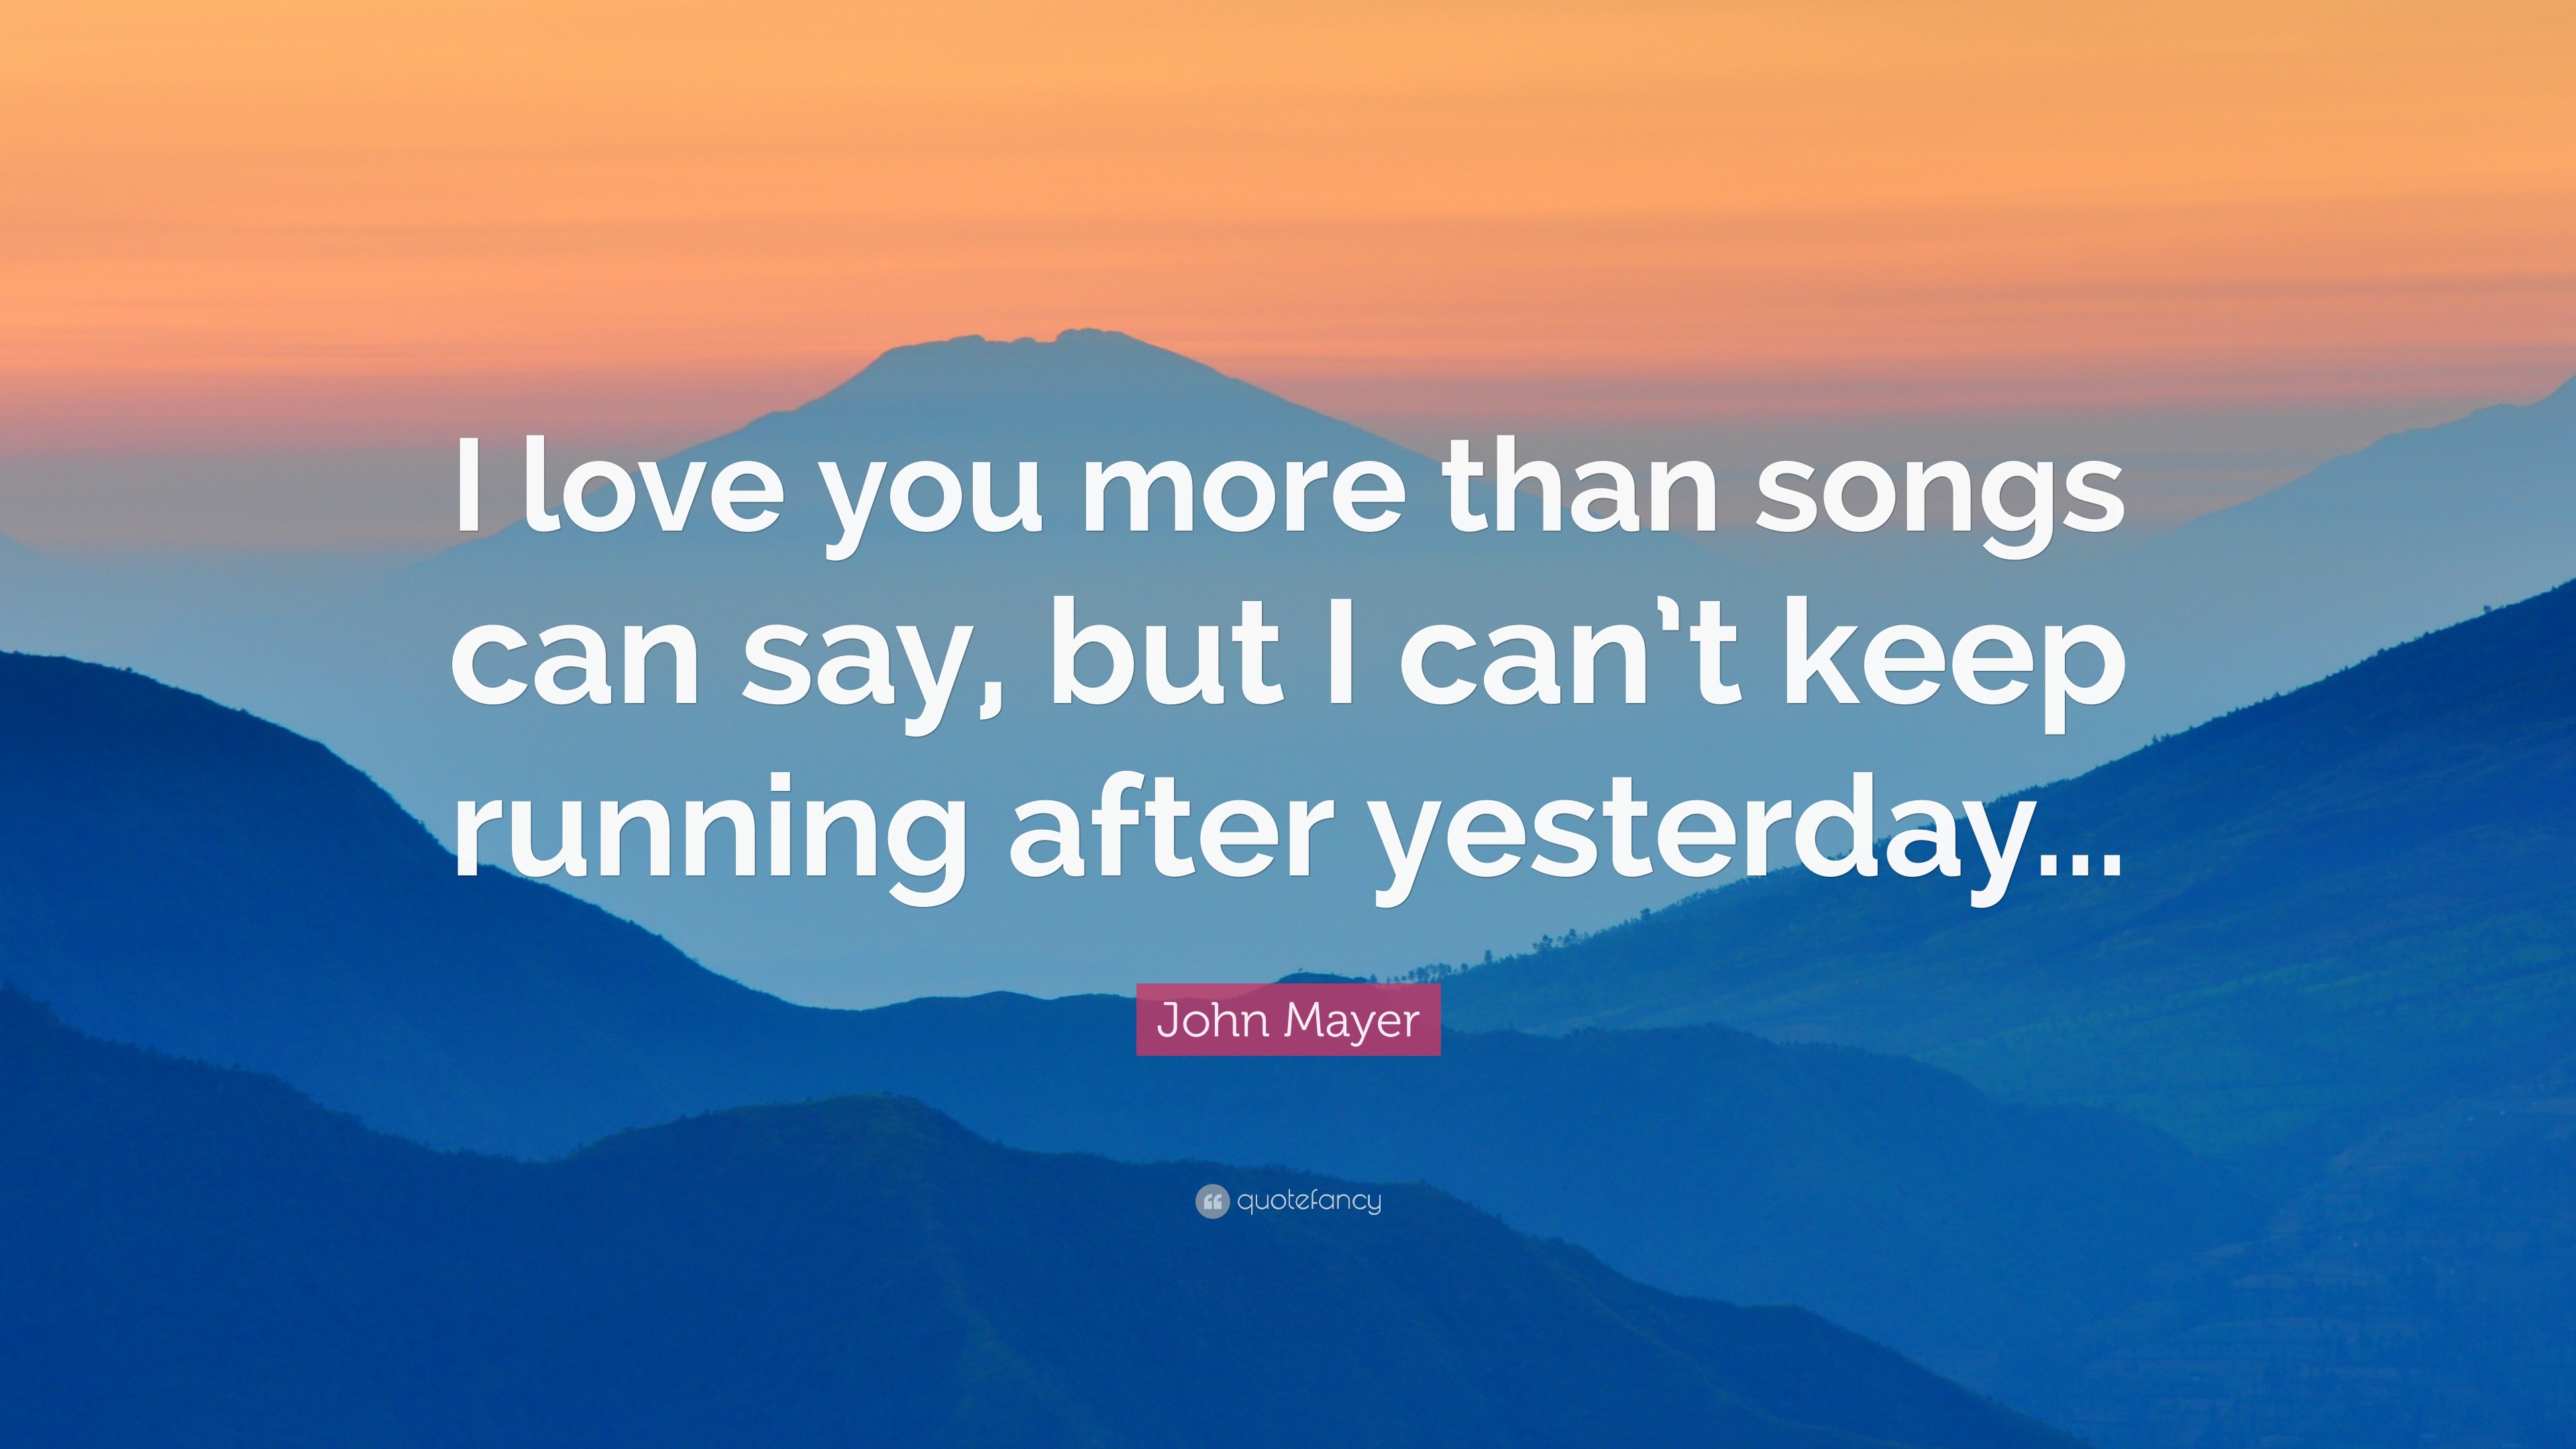 John Mayer Quote “I love you more than songs can say but I